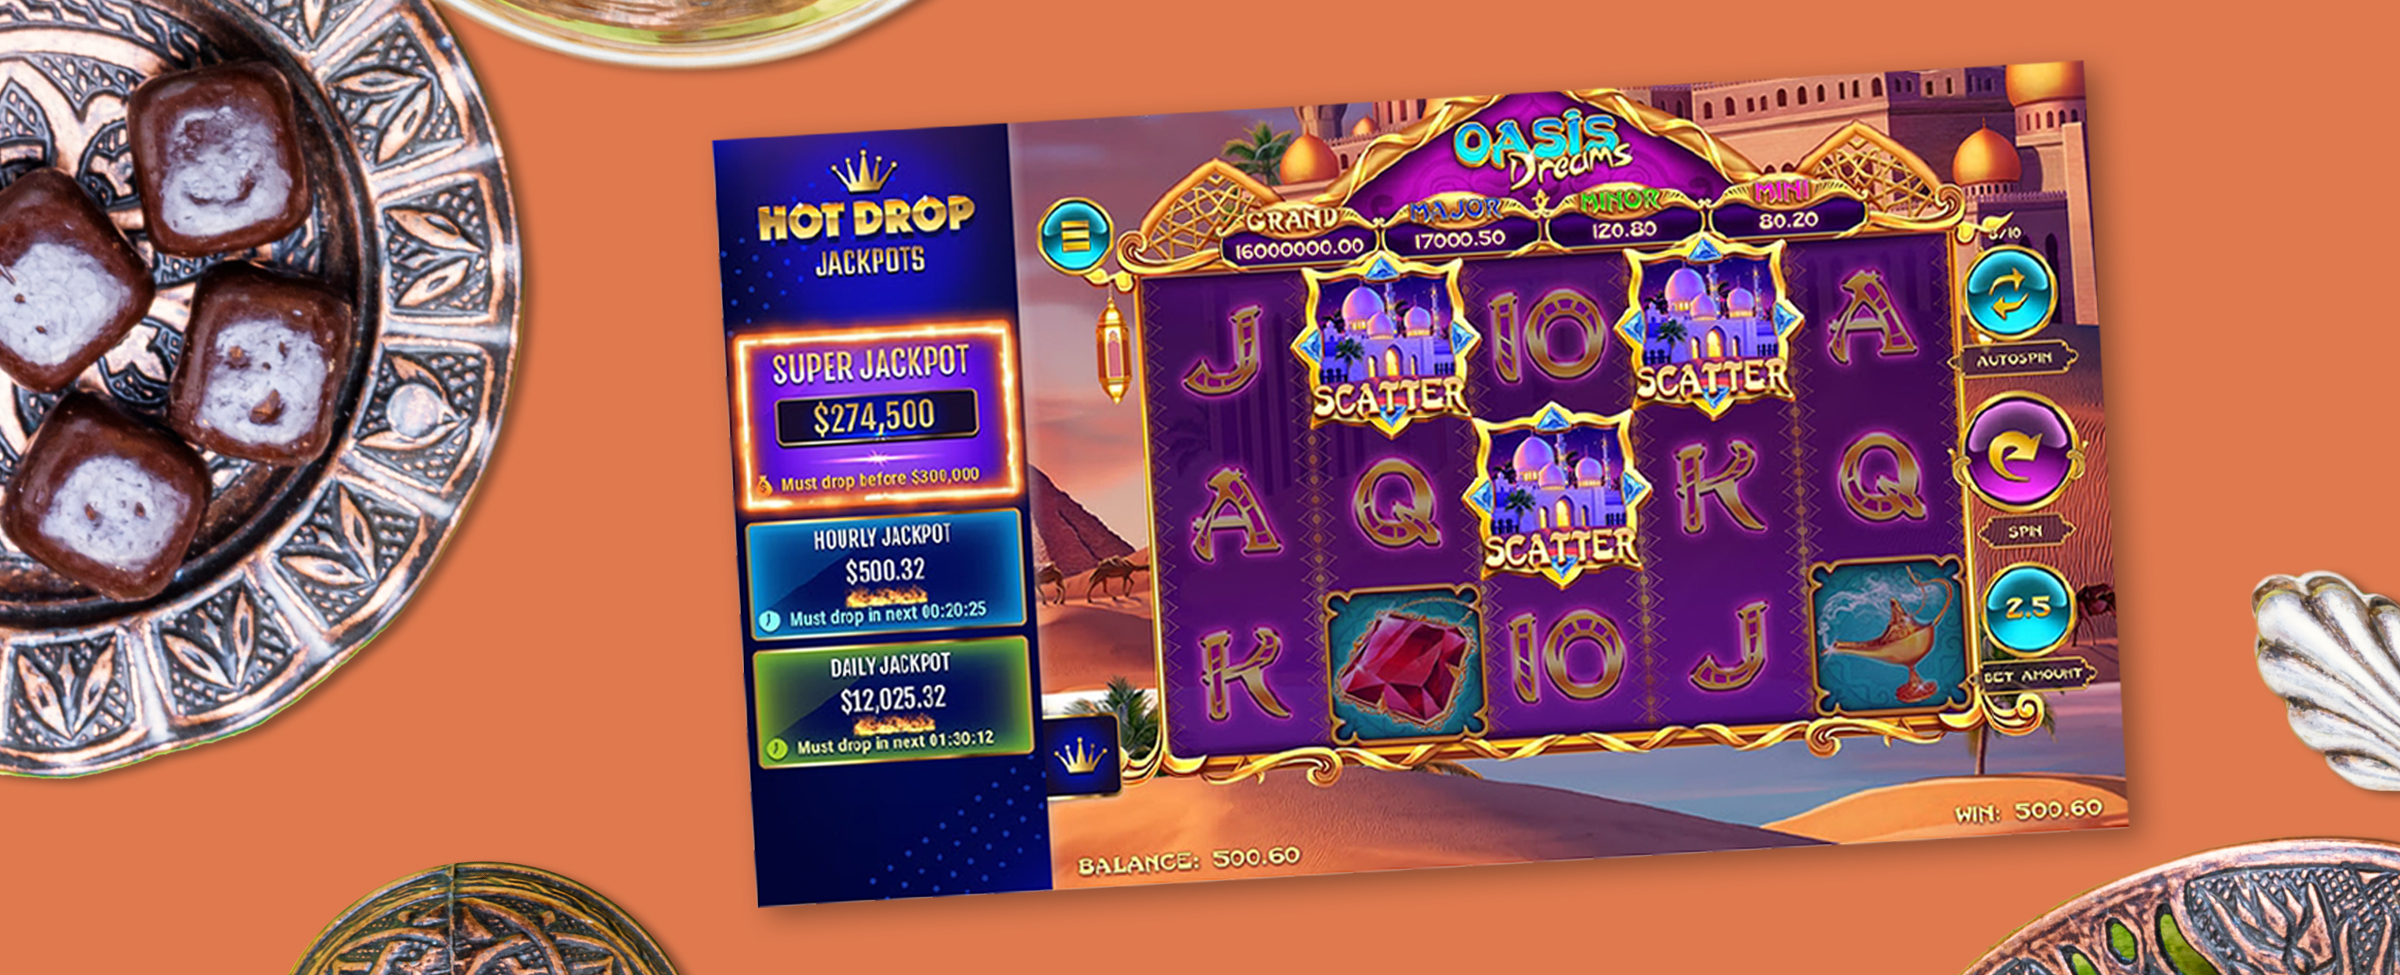 Featuring prominently in the middle of the image is a screenshot of the Cafe Casino slot game, Oasis Dreams Hot Drop Jackpots, showing various symbols on the reels, along with the jackpot panel. To the left, four chocolates sit on a brass plate, accompanied by various brass trinkets just out of frame.